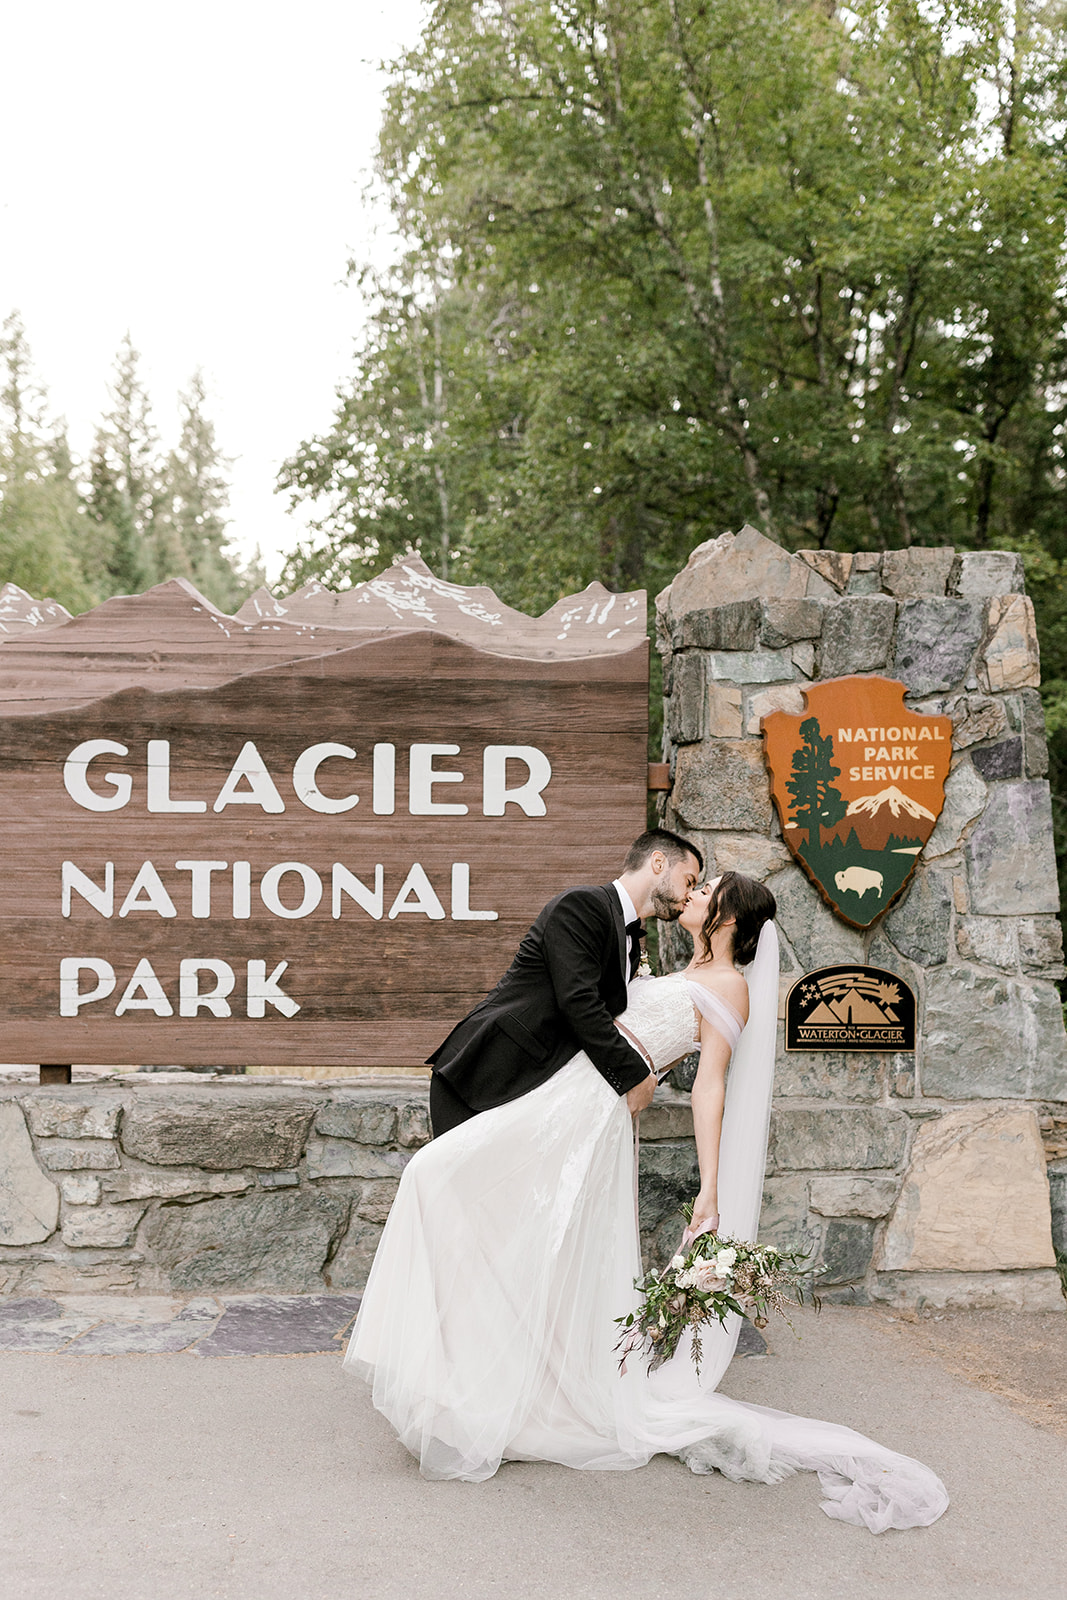 Bride and groom portraits by the Glacier National Park sign